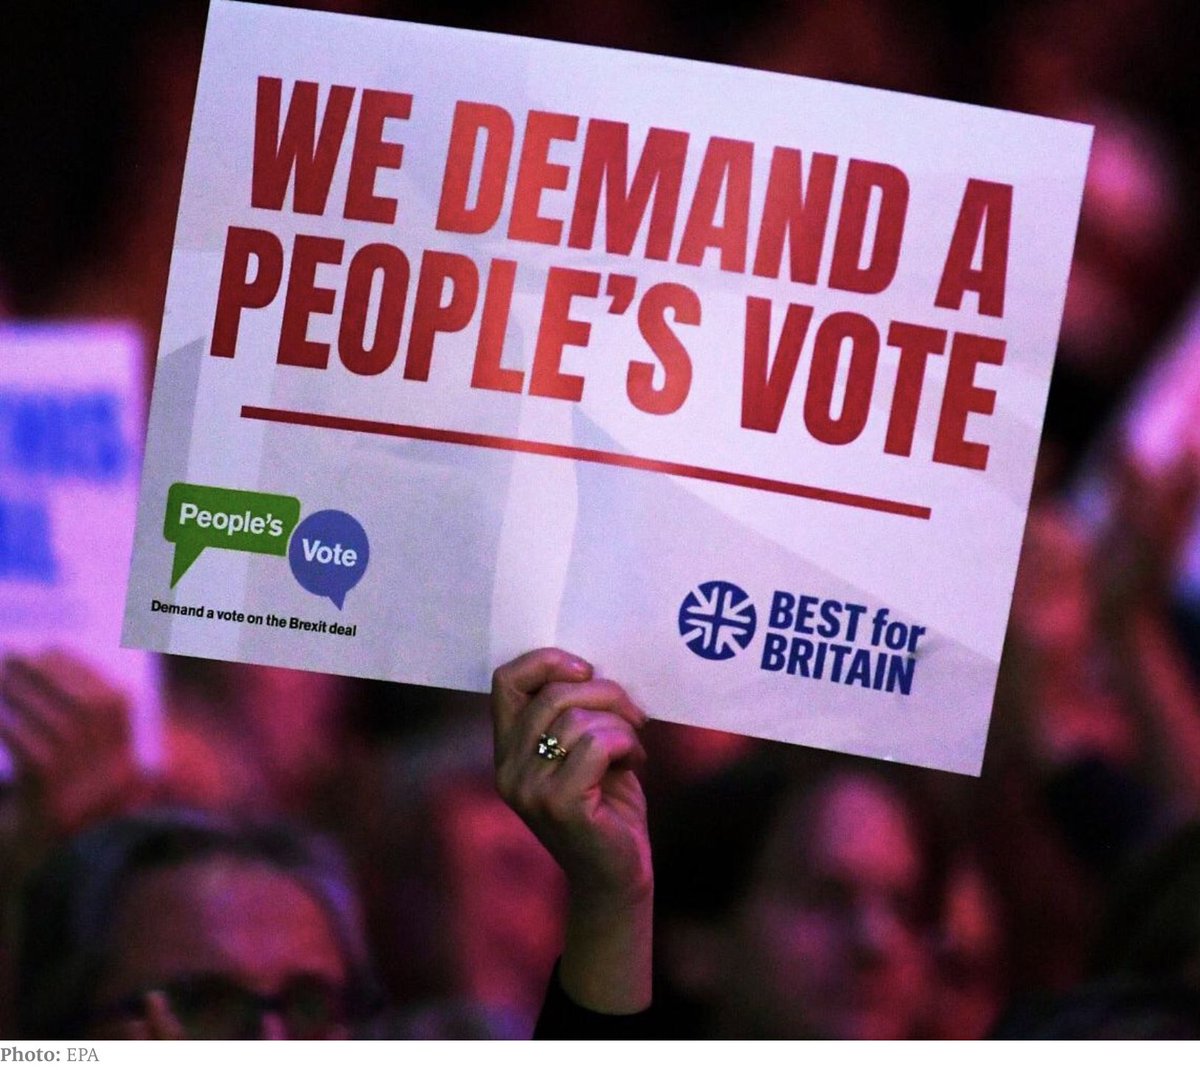 Apparently, #LiarJohnson ‘can’t ignore’ the thousands marching for #BLM

Good!

But he *totally ignored* the Millions marching for #RevokeA50 and #PeoplesVote, so don’t anyone hold their breath!